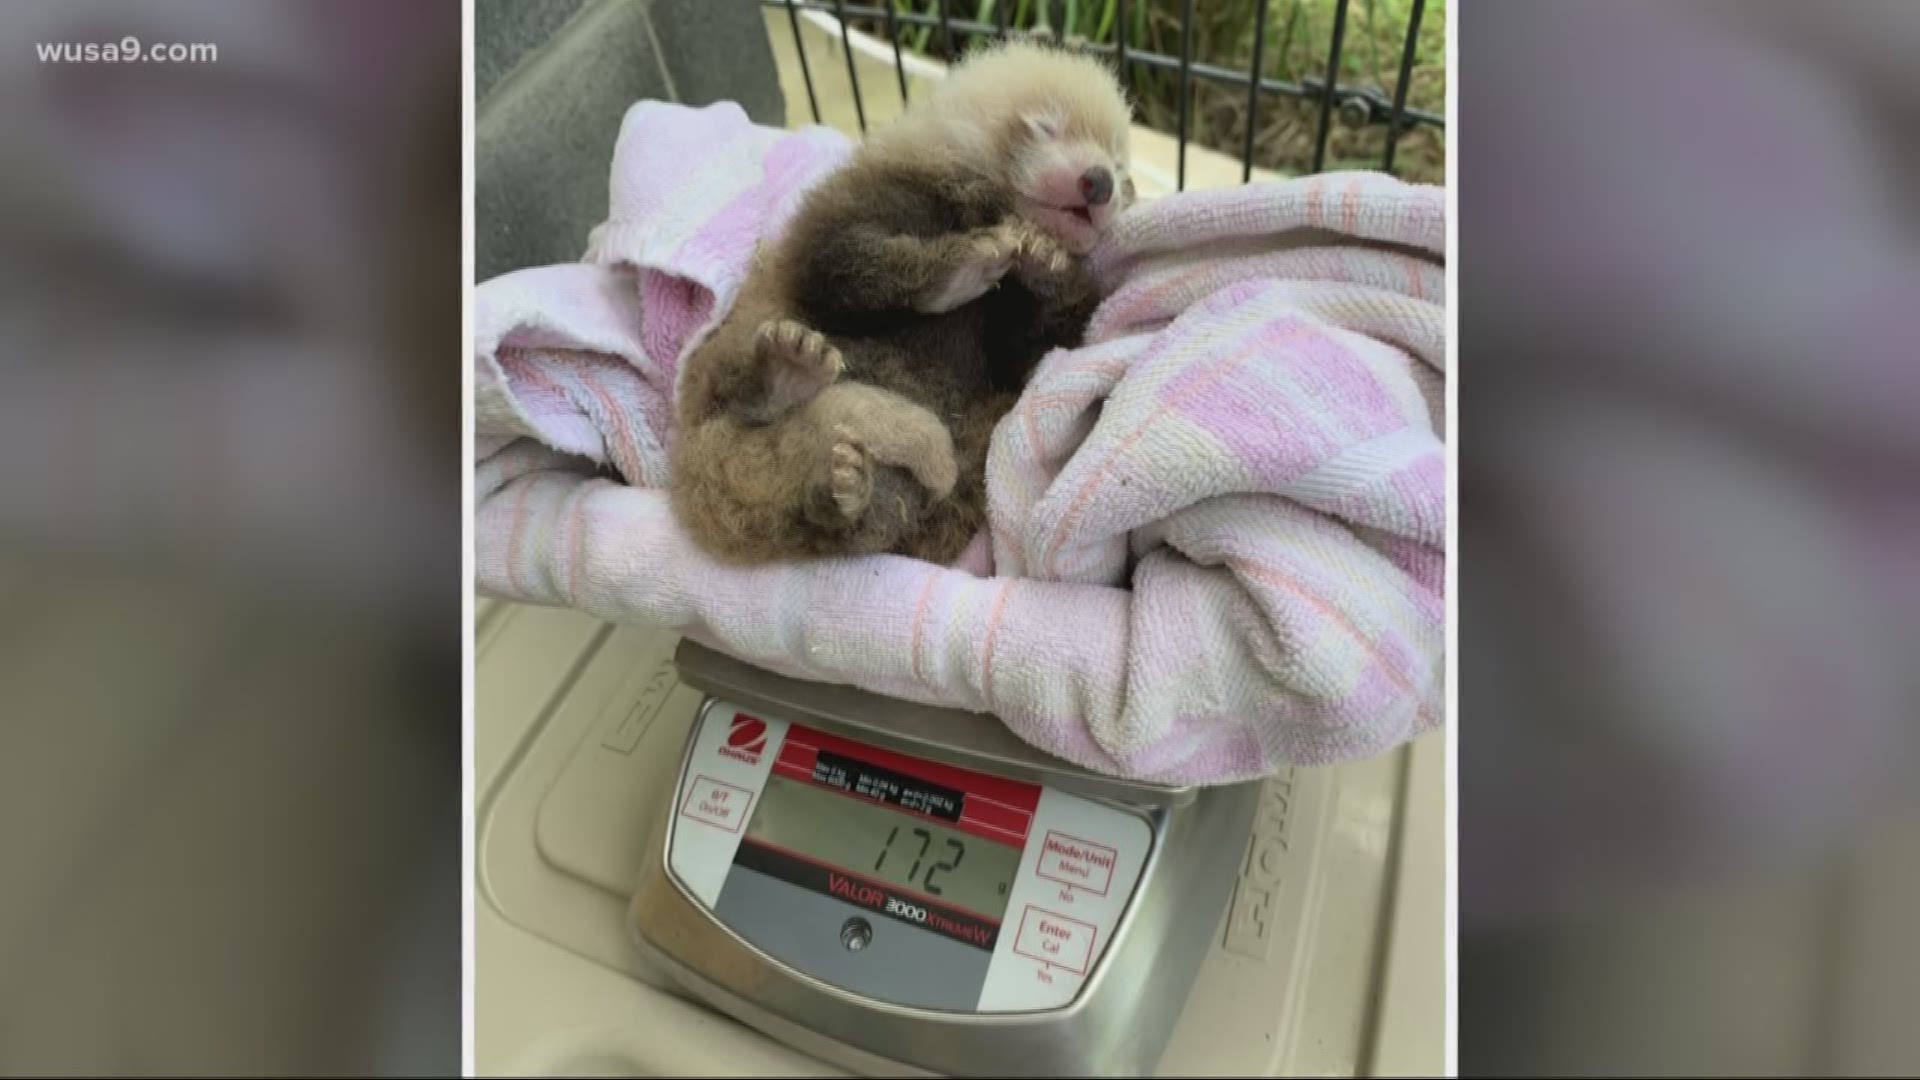 The panda gave birth early this month at the Smithsonian Conversation Biology Institute.